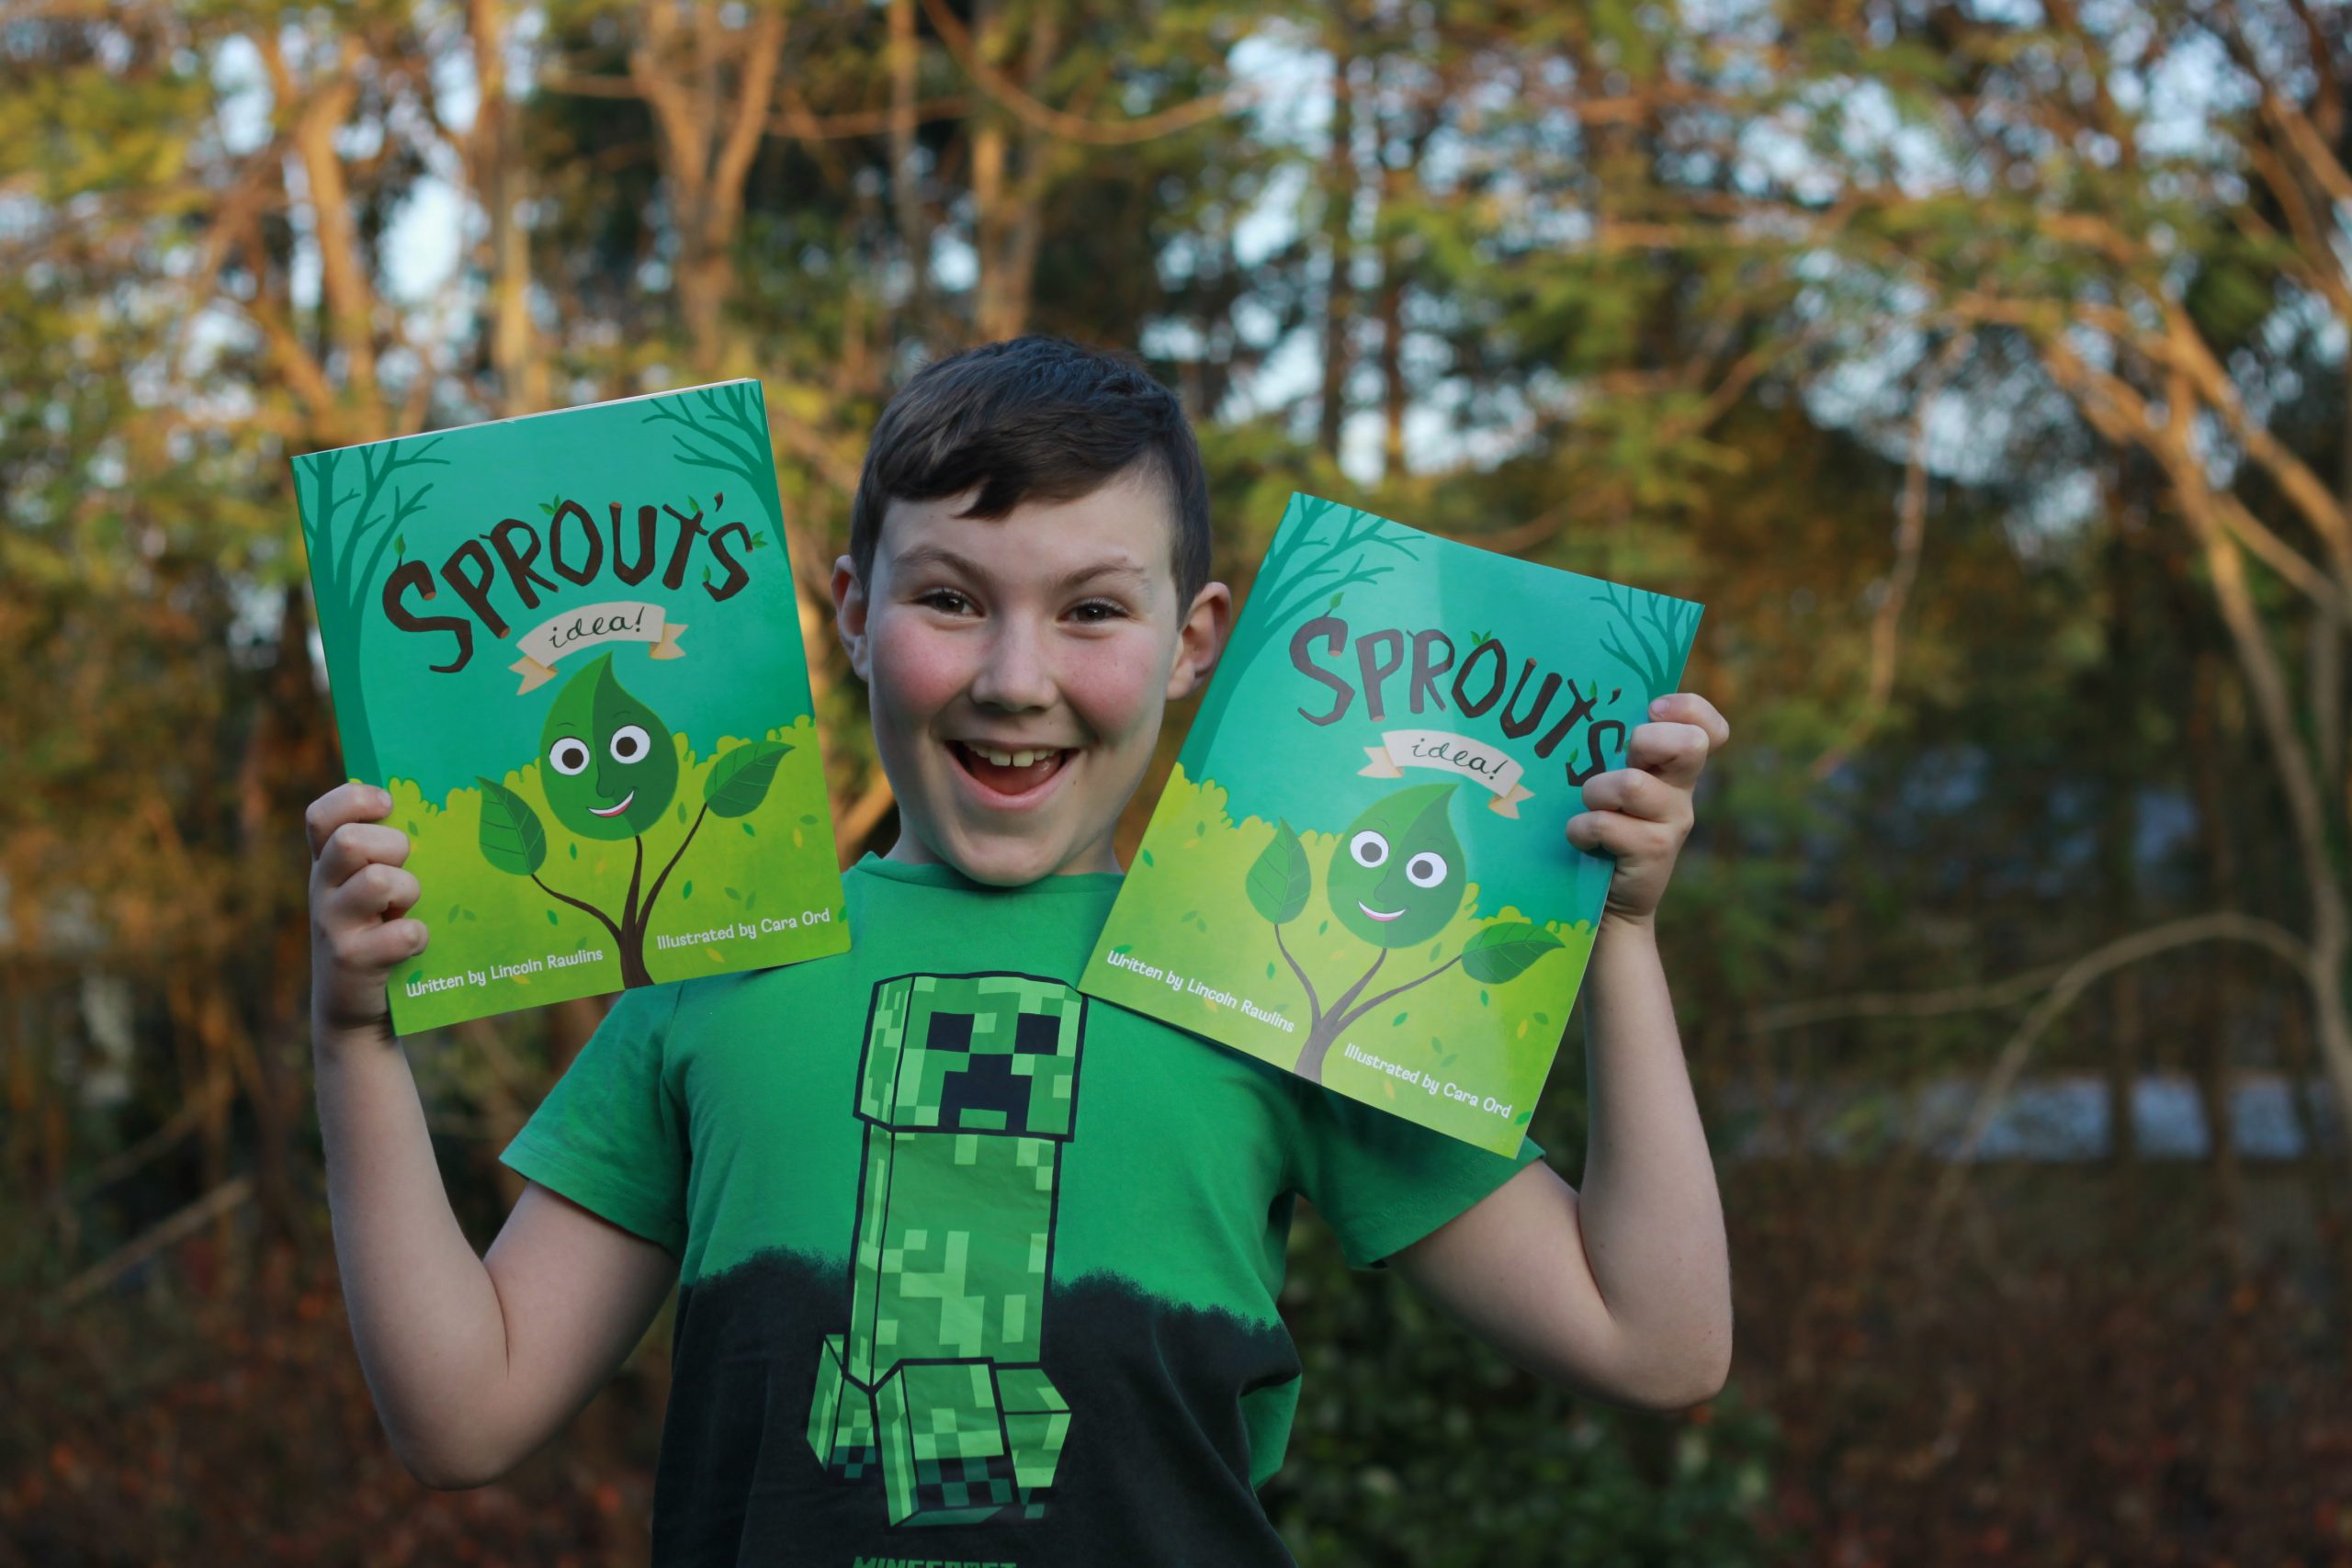 Big dream: Coast sprouts one of nation’s youngest authors